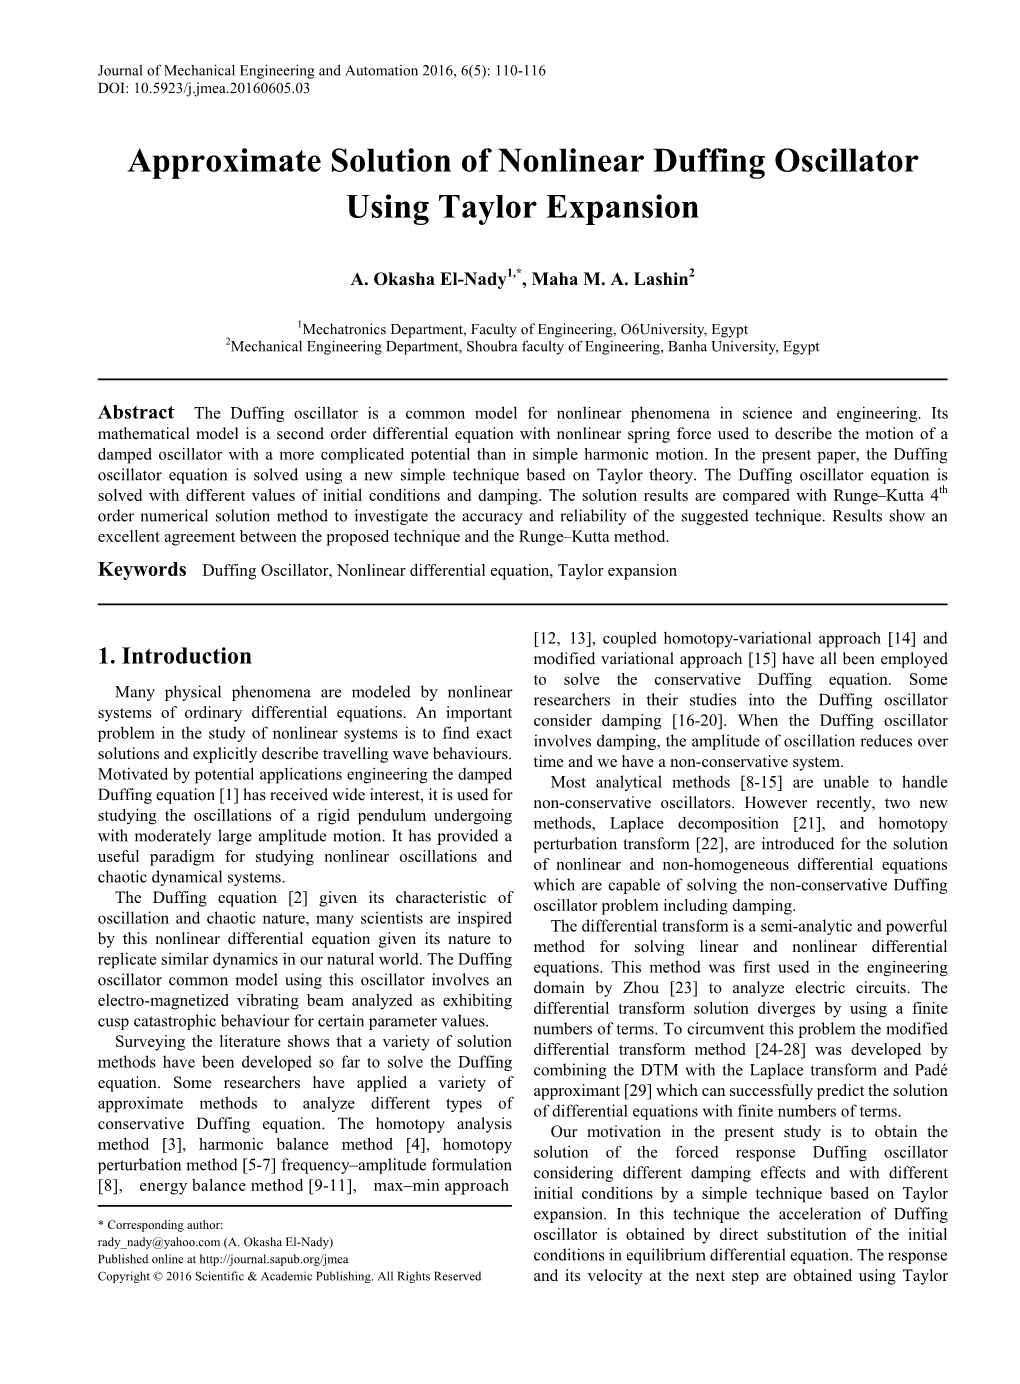 Duffing Oscillator, Nonlinear Differential Equation, Taylor Expansion